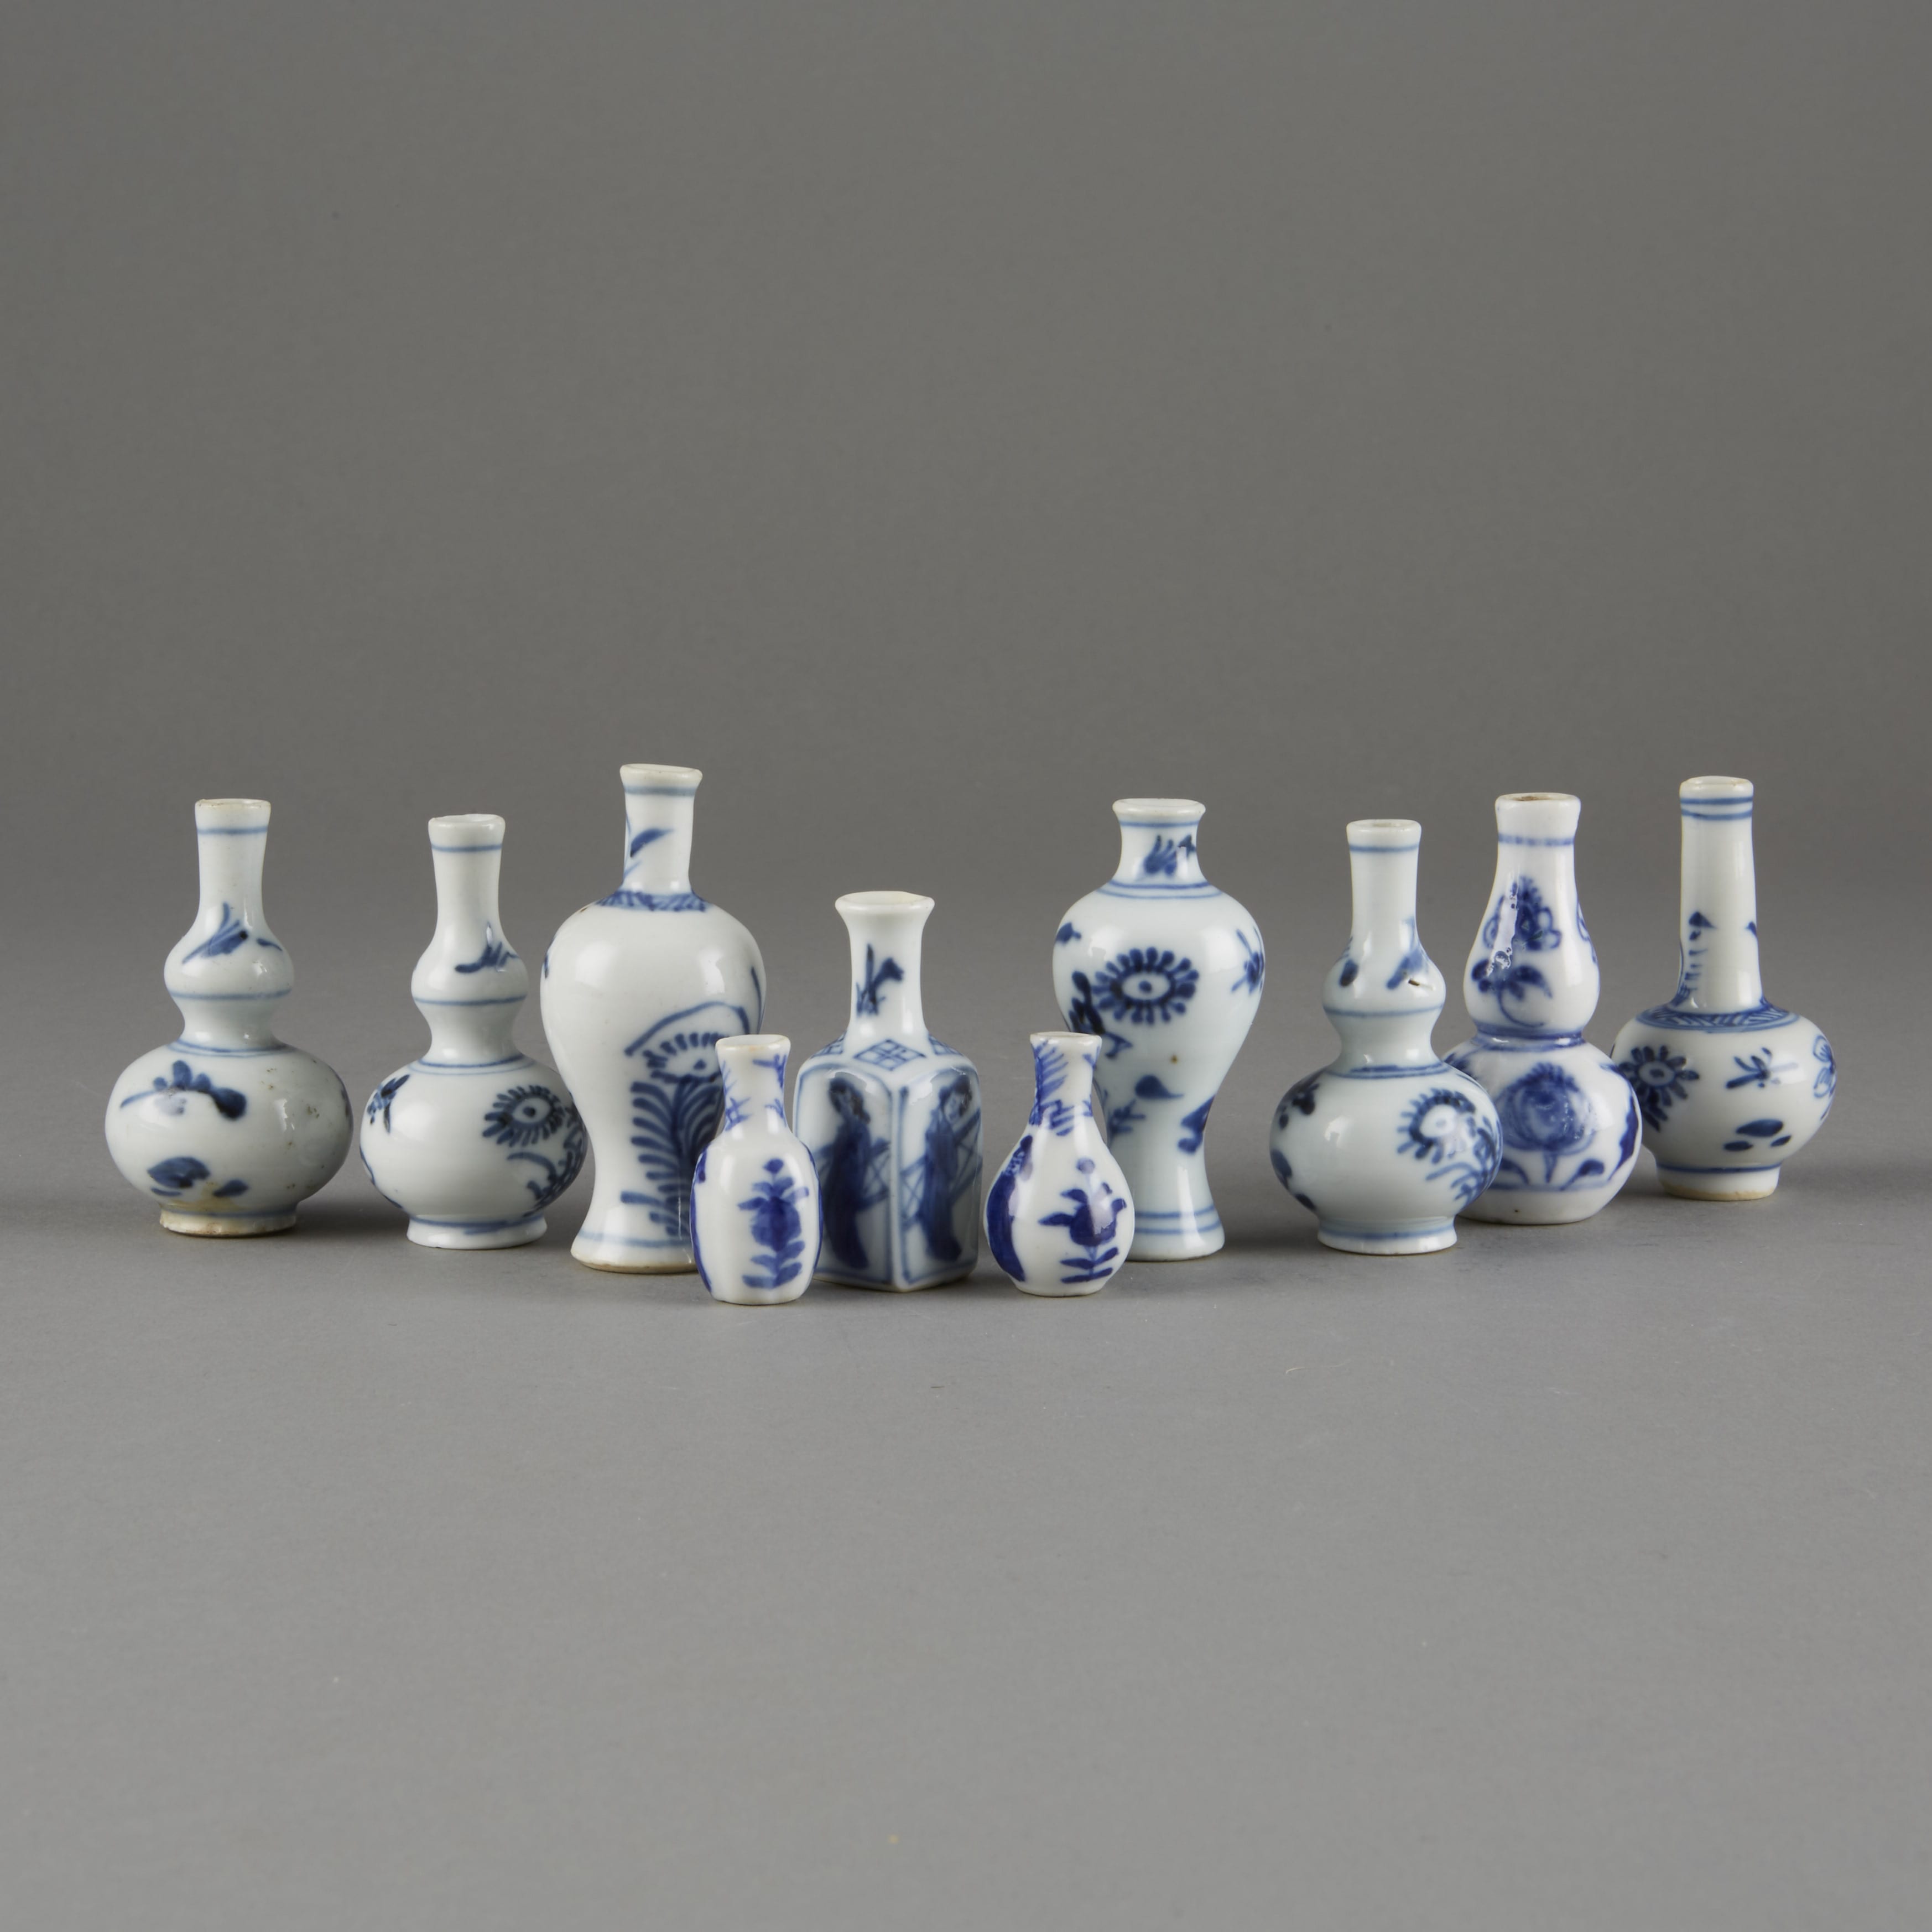 Lot 090: Chinese 18th Century Kangxi Blue and White Export Porcelain Group of Miniature Vases